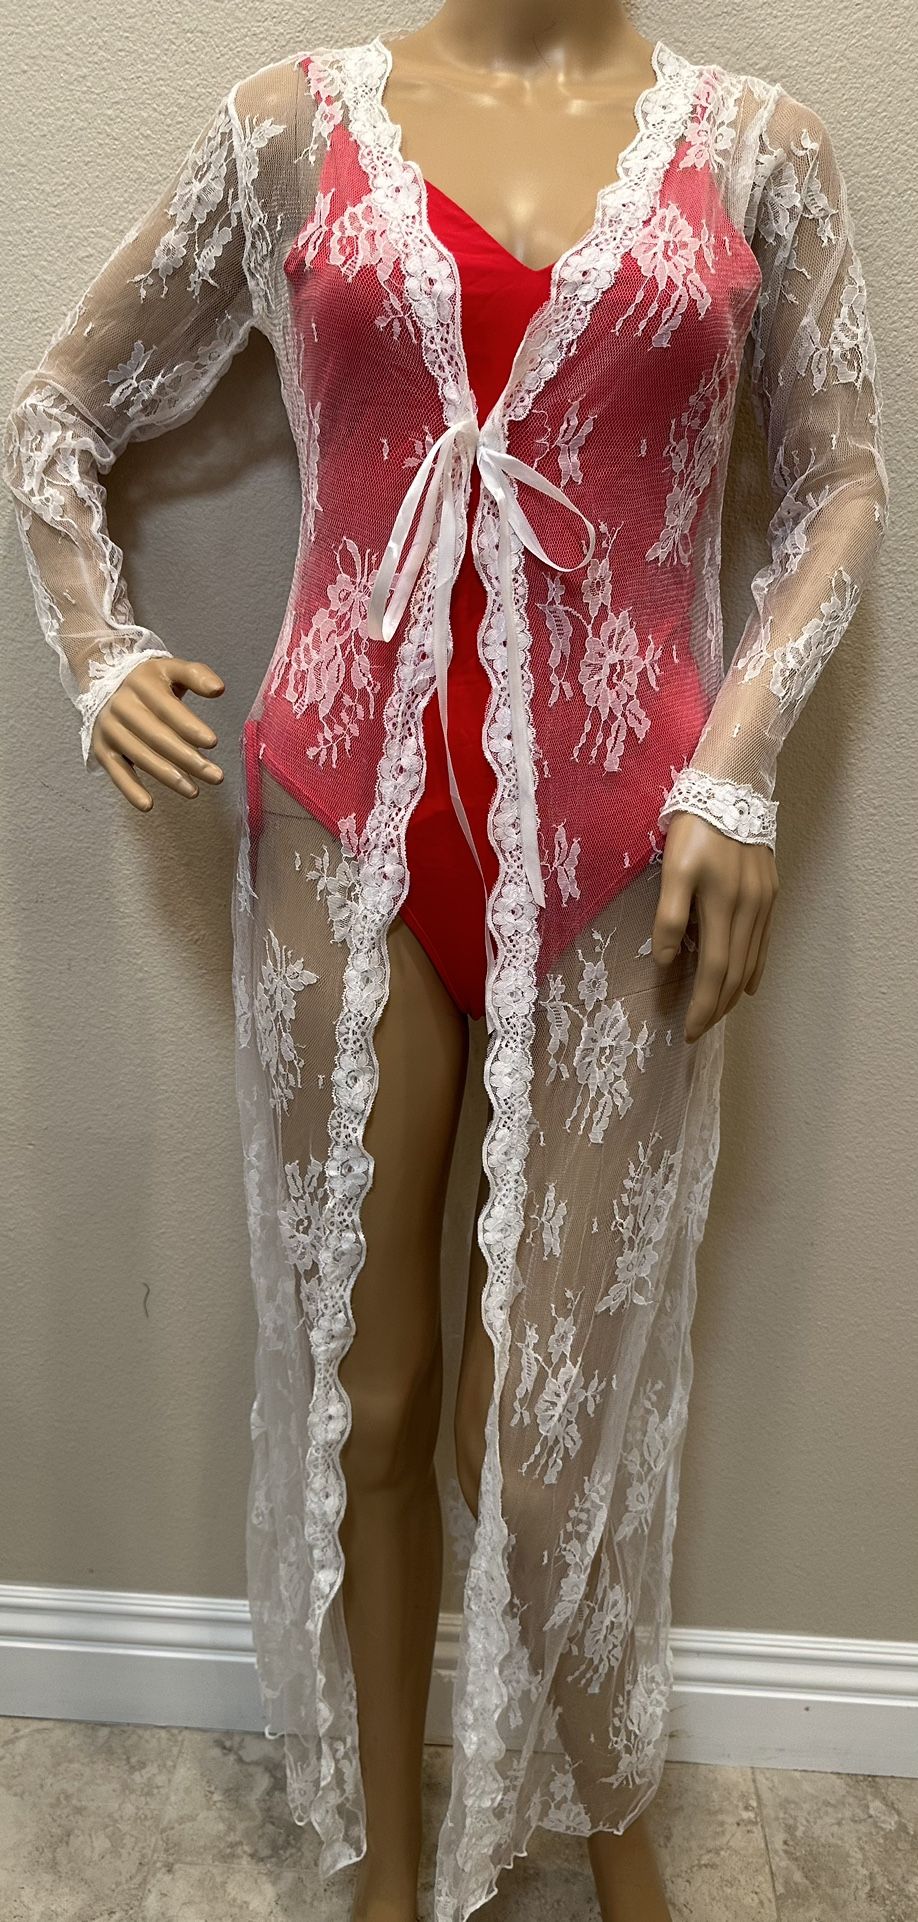 White Long Lace Maxi Cover Up Robe Beach Swimsuit Lingerie Robe